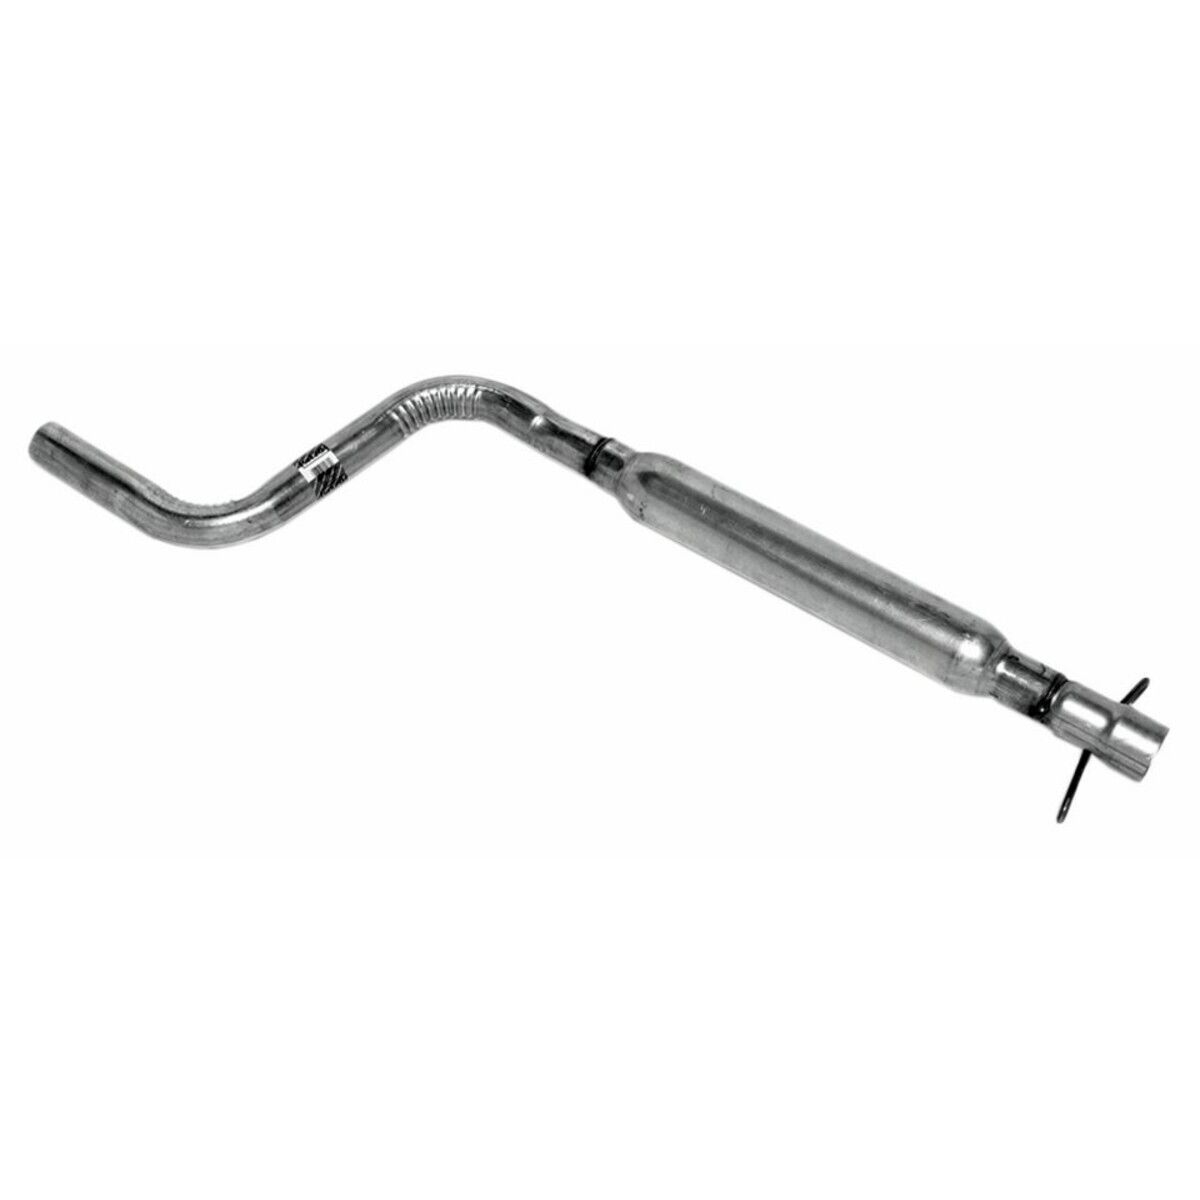 55170 Walker Exhaust Pipe for Olds Le Sabre NINETY EIGHT Buick LeSabre Pontiac